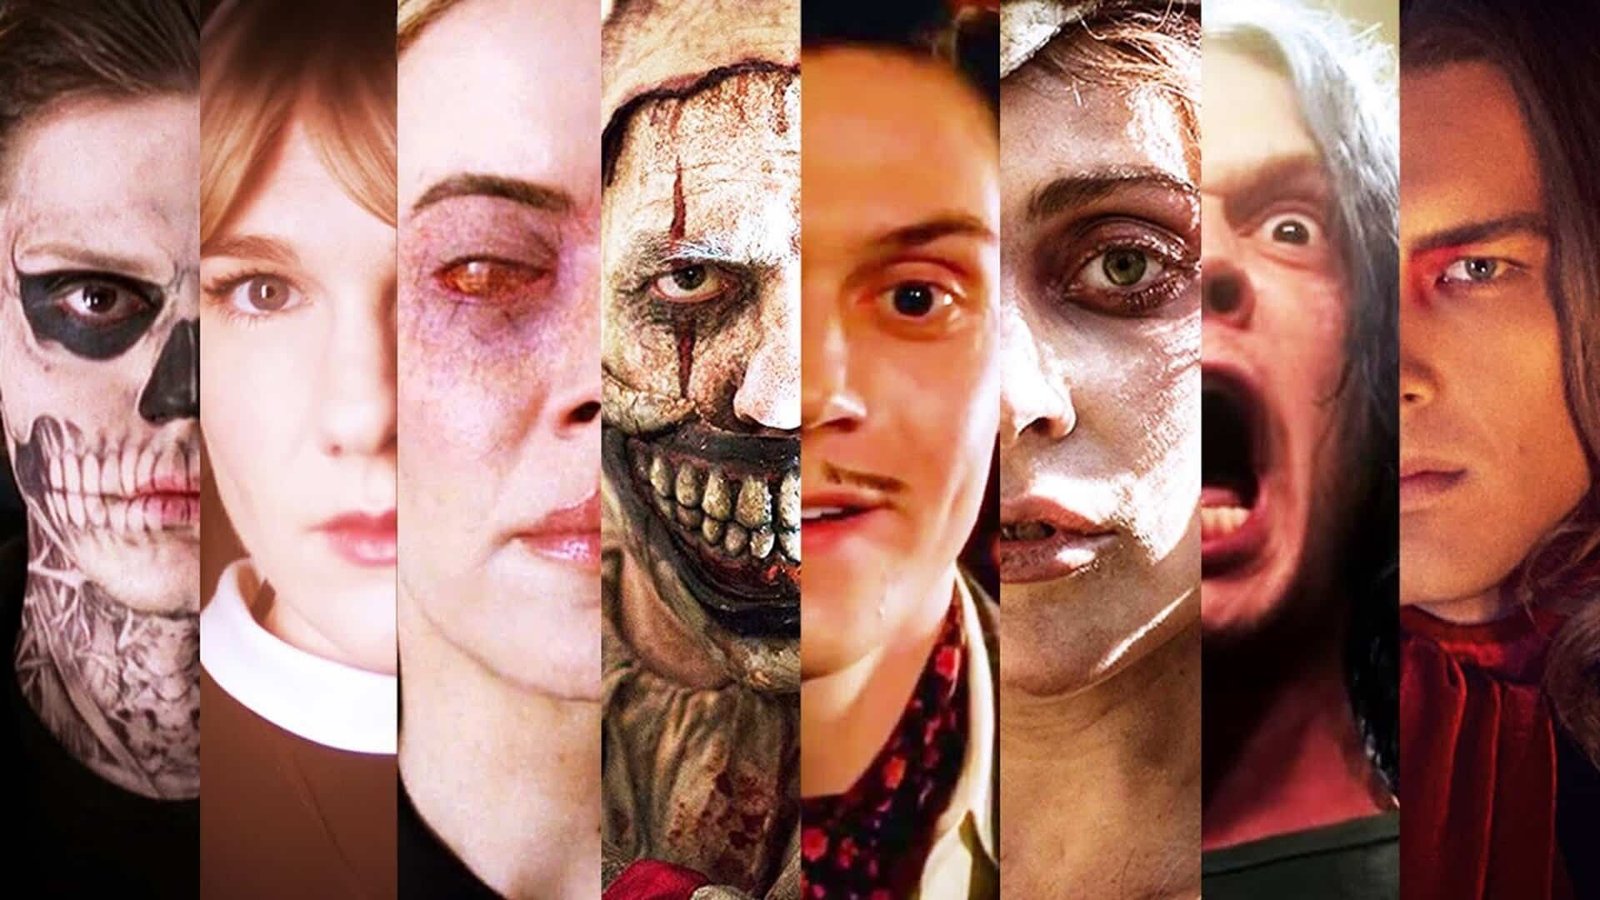 Will there be American Horror Story Season 11?